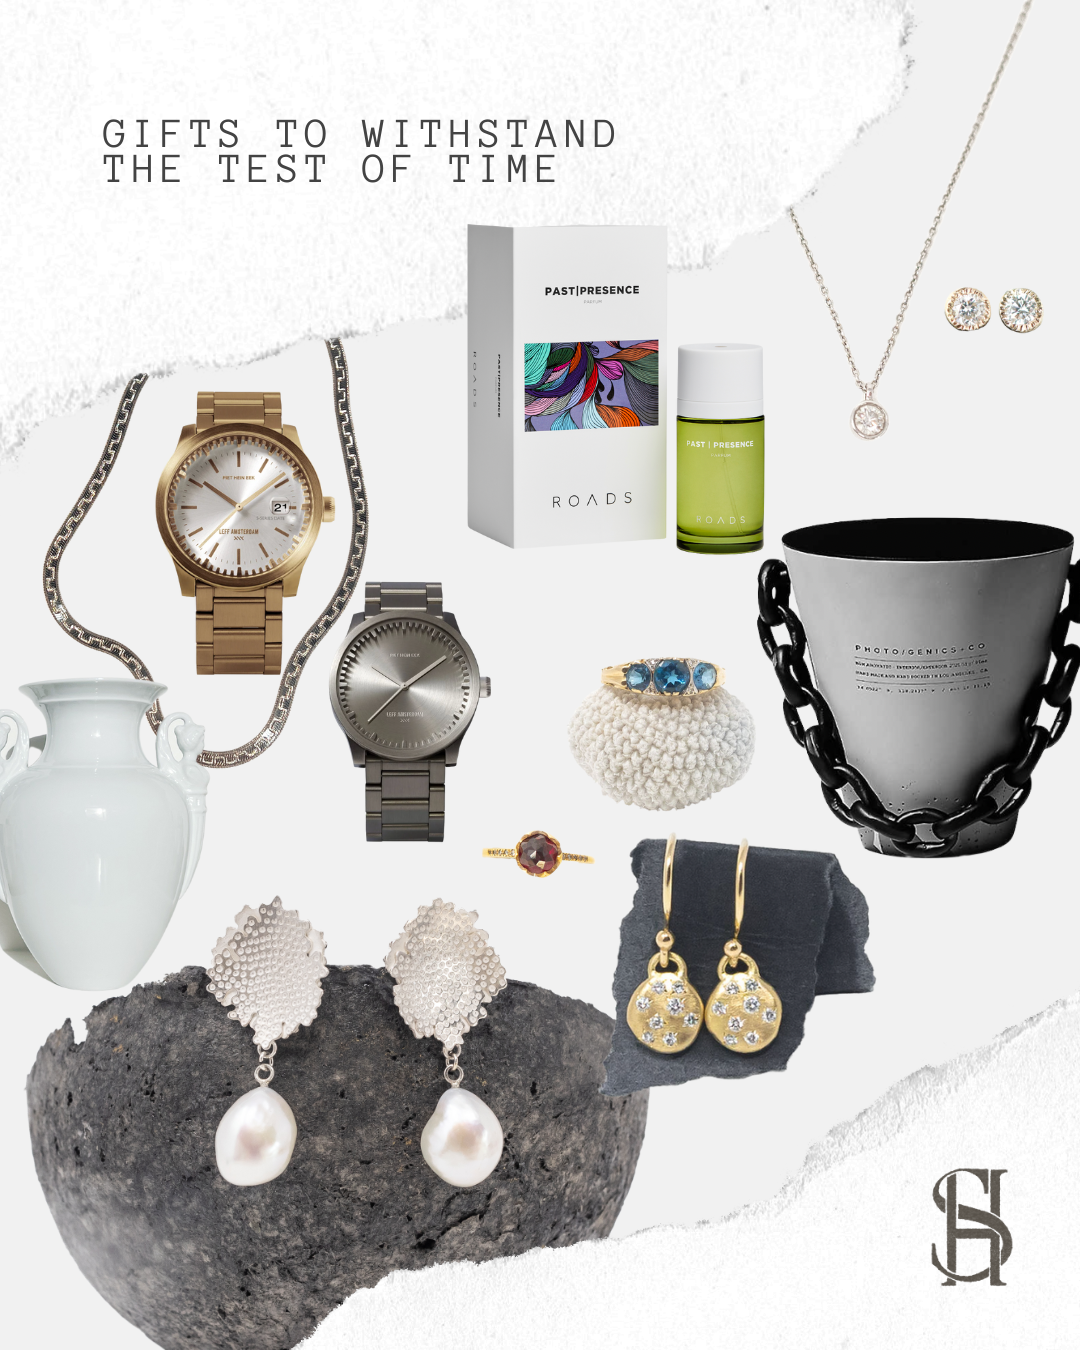 holiday gift guide: gifts to withstand the test of time